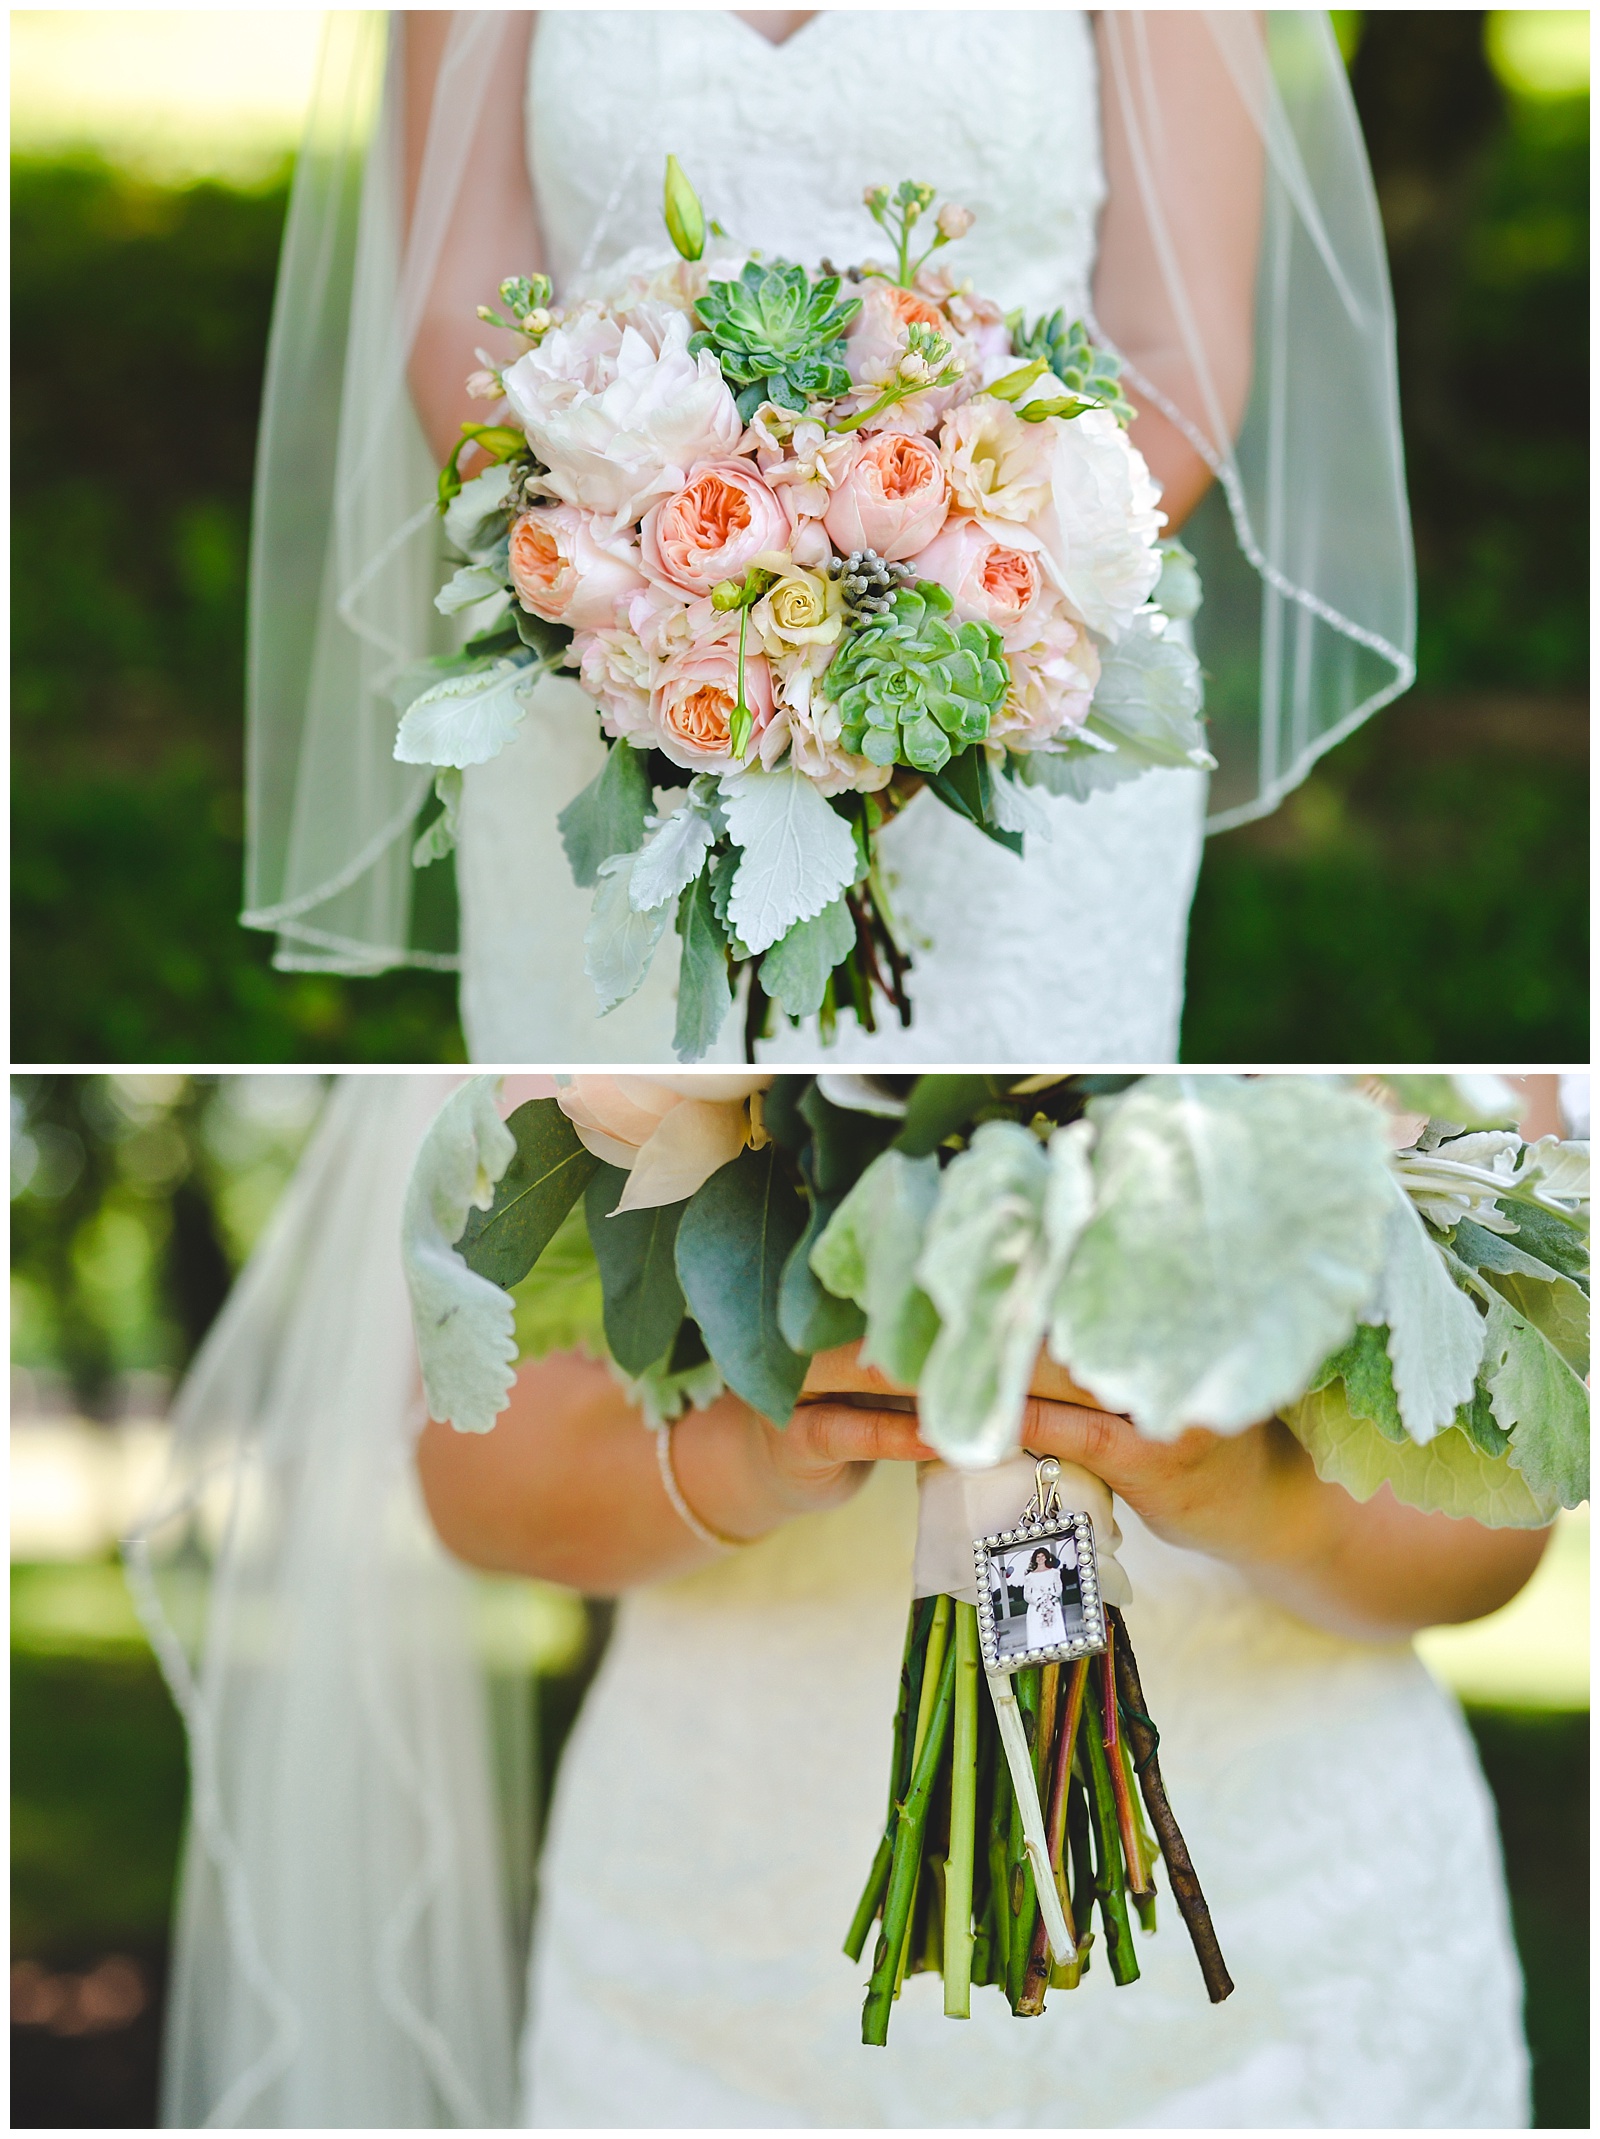 Our Wedding Day | Monica Brown Photography | monicabrownphoto.com